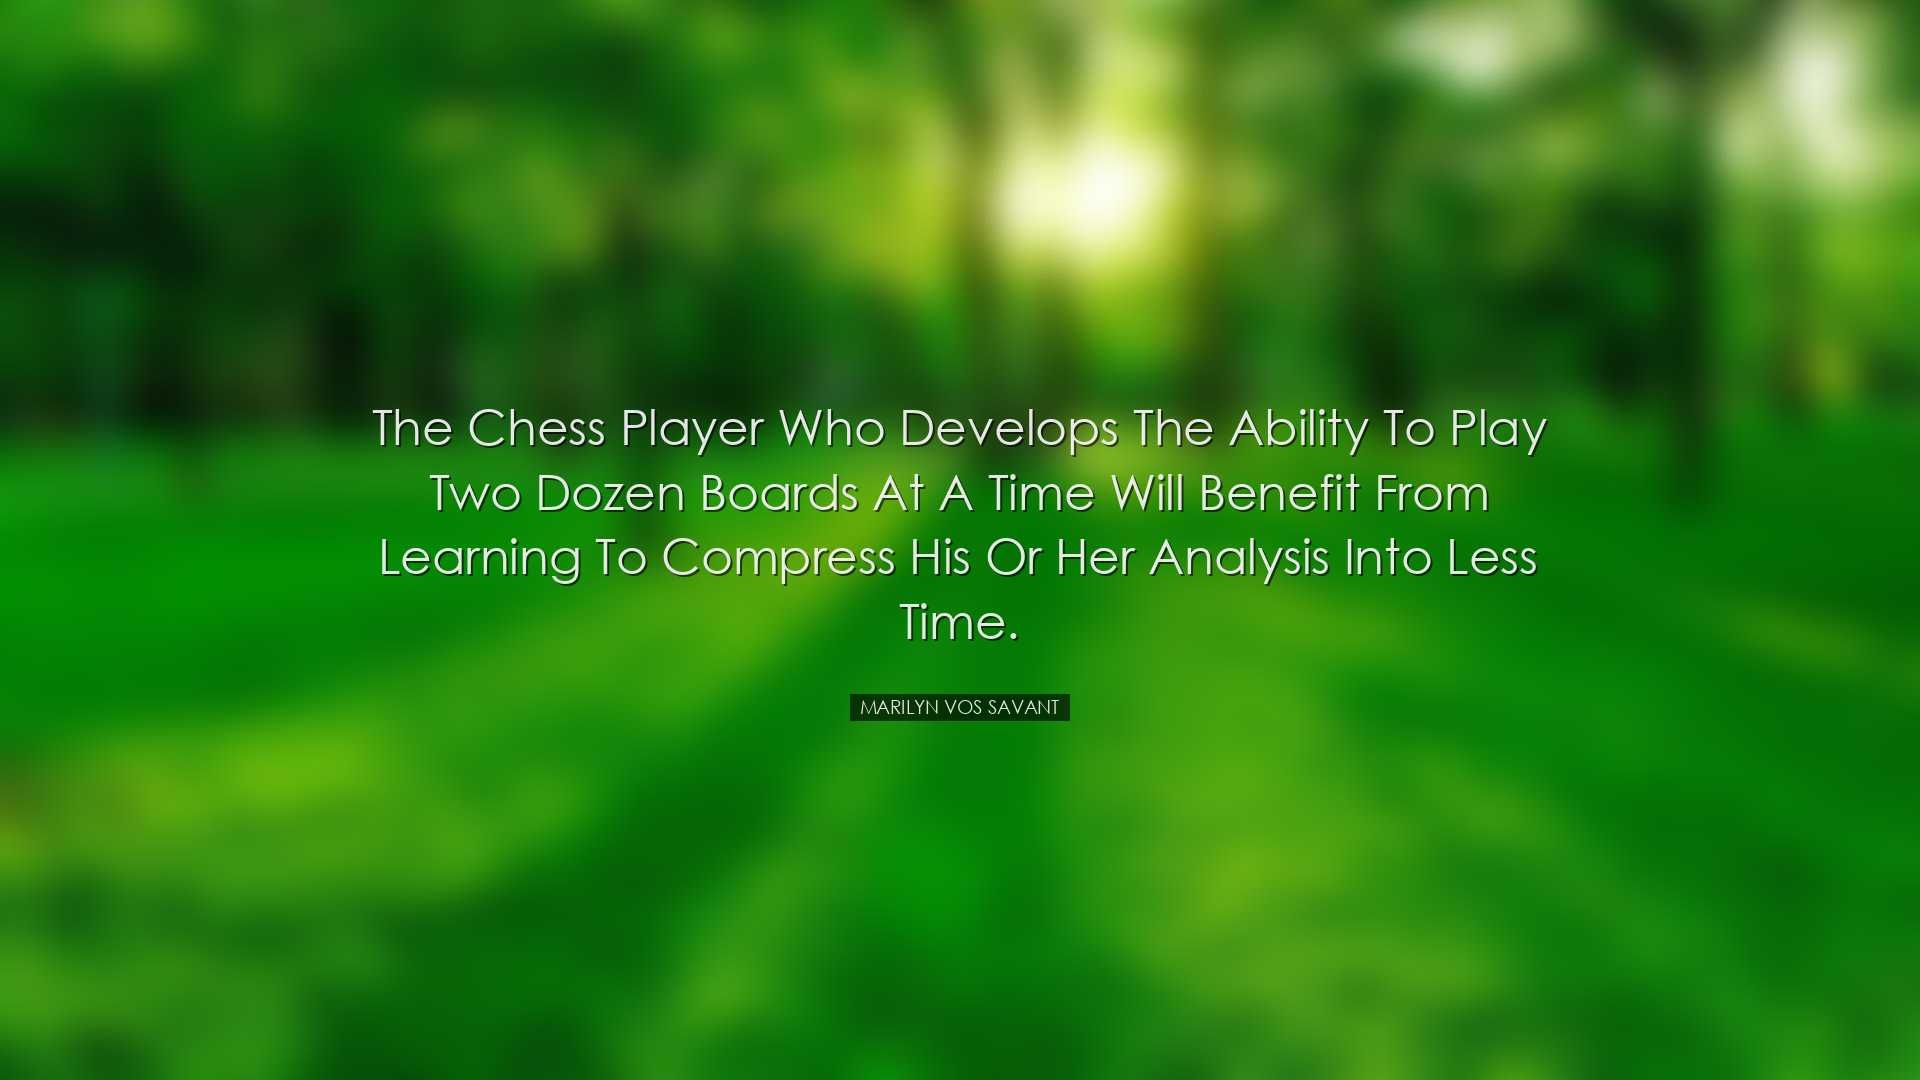 The chess player who develops the ability to play two dozen boards